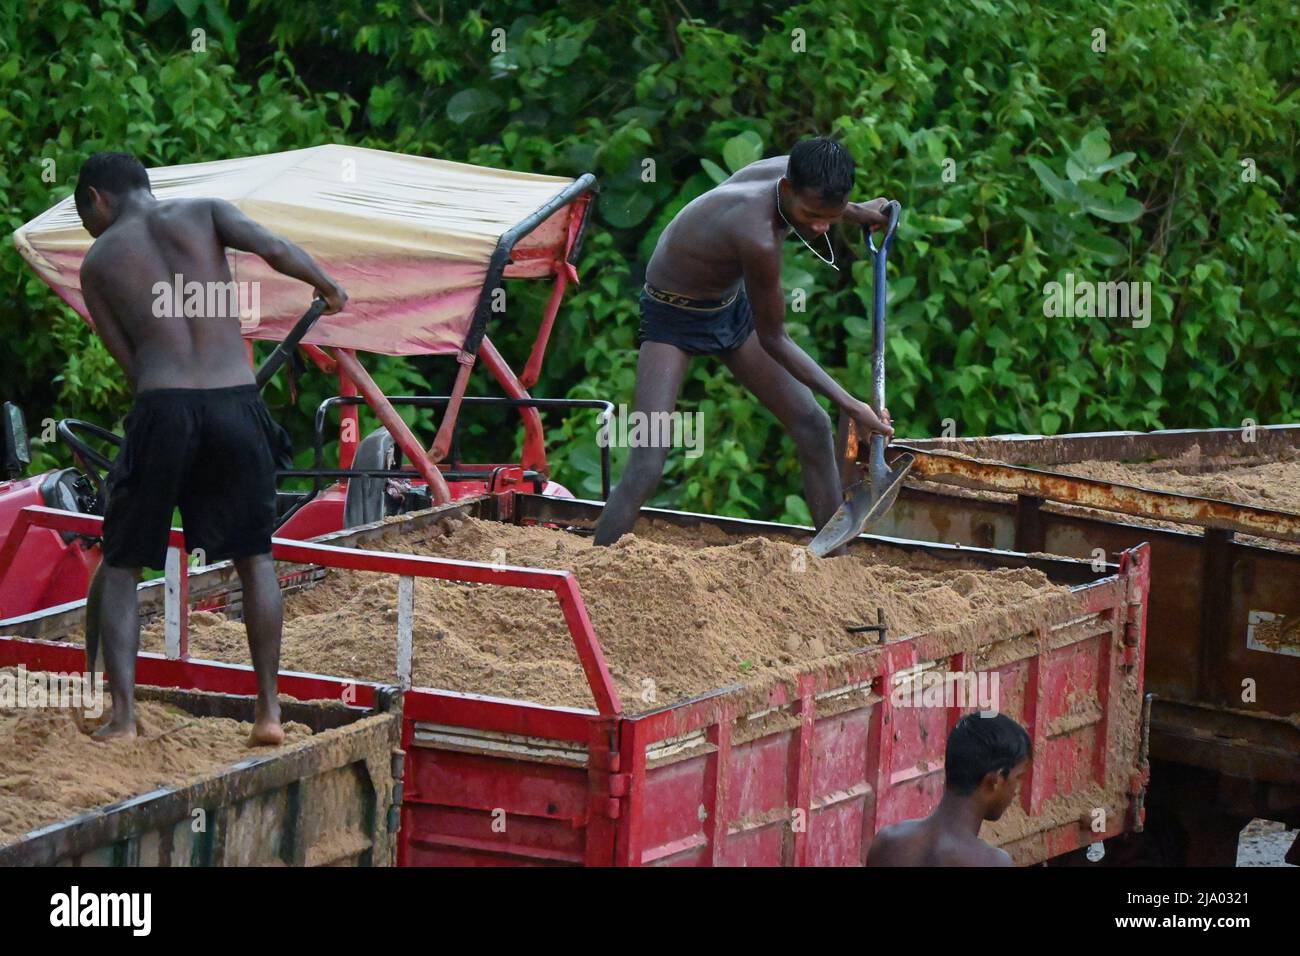 river sand loading by people Stock Photo